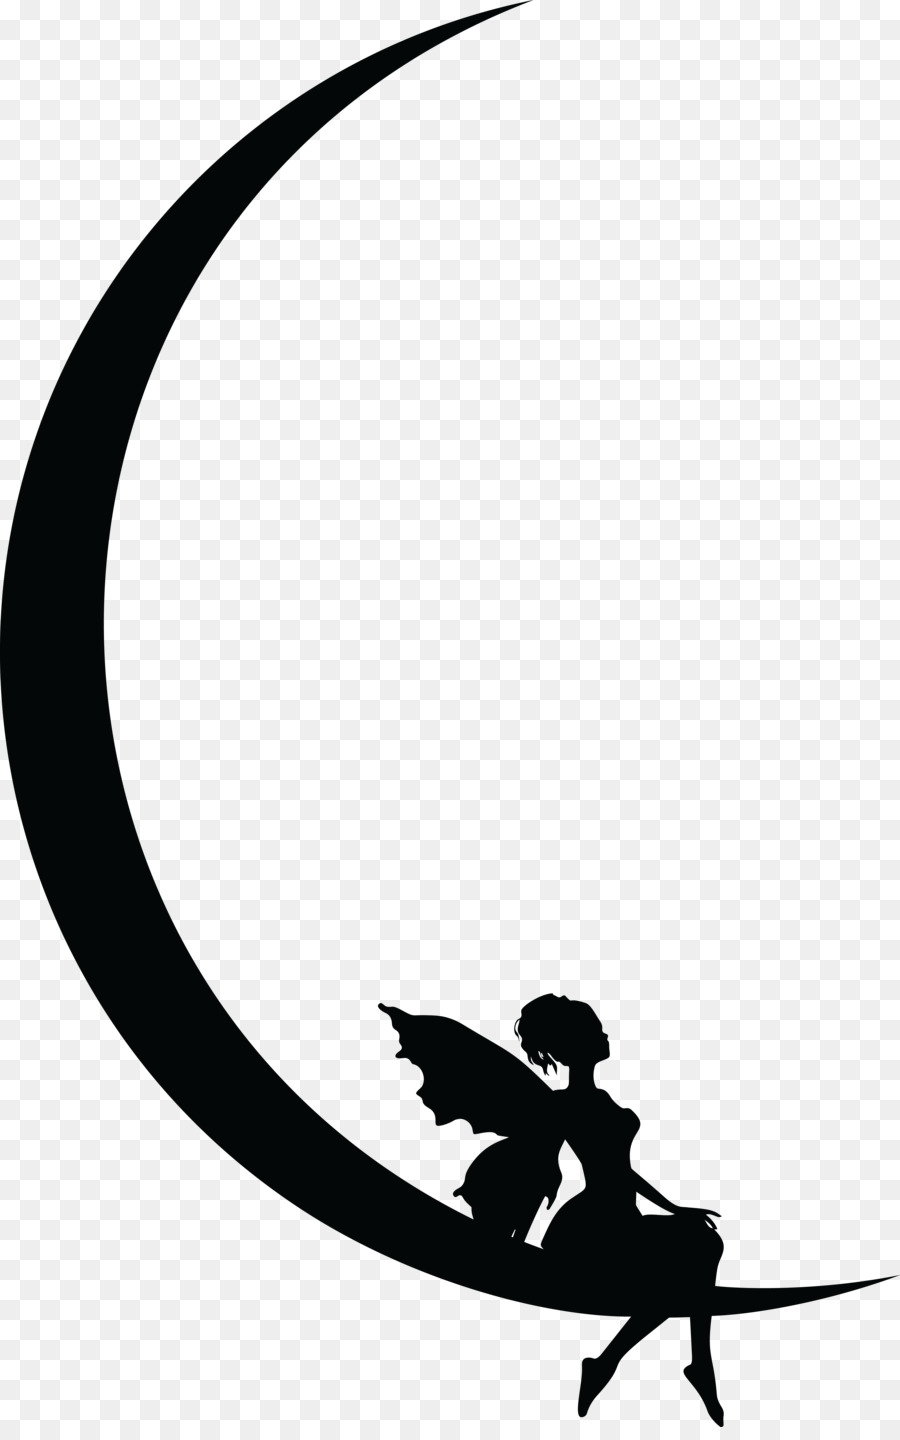 Moon Silhouette Clip art - moon png download - 4000*6343 - Free Transparent Moon png Download.